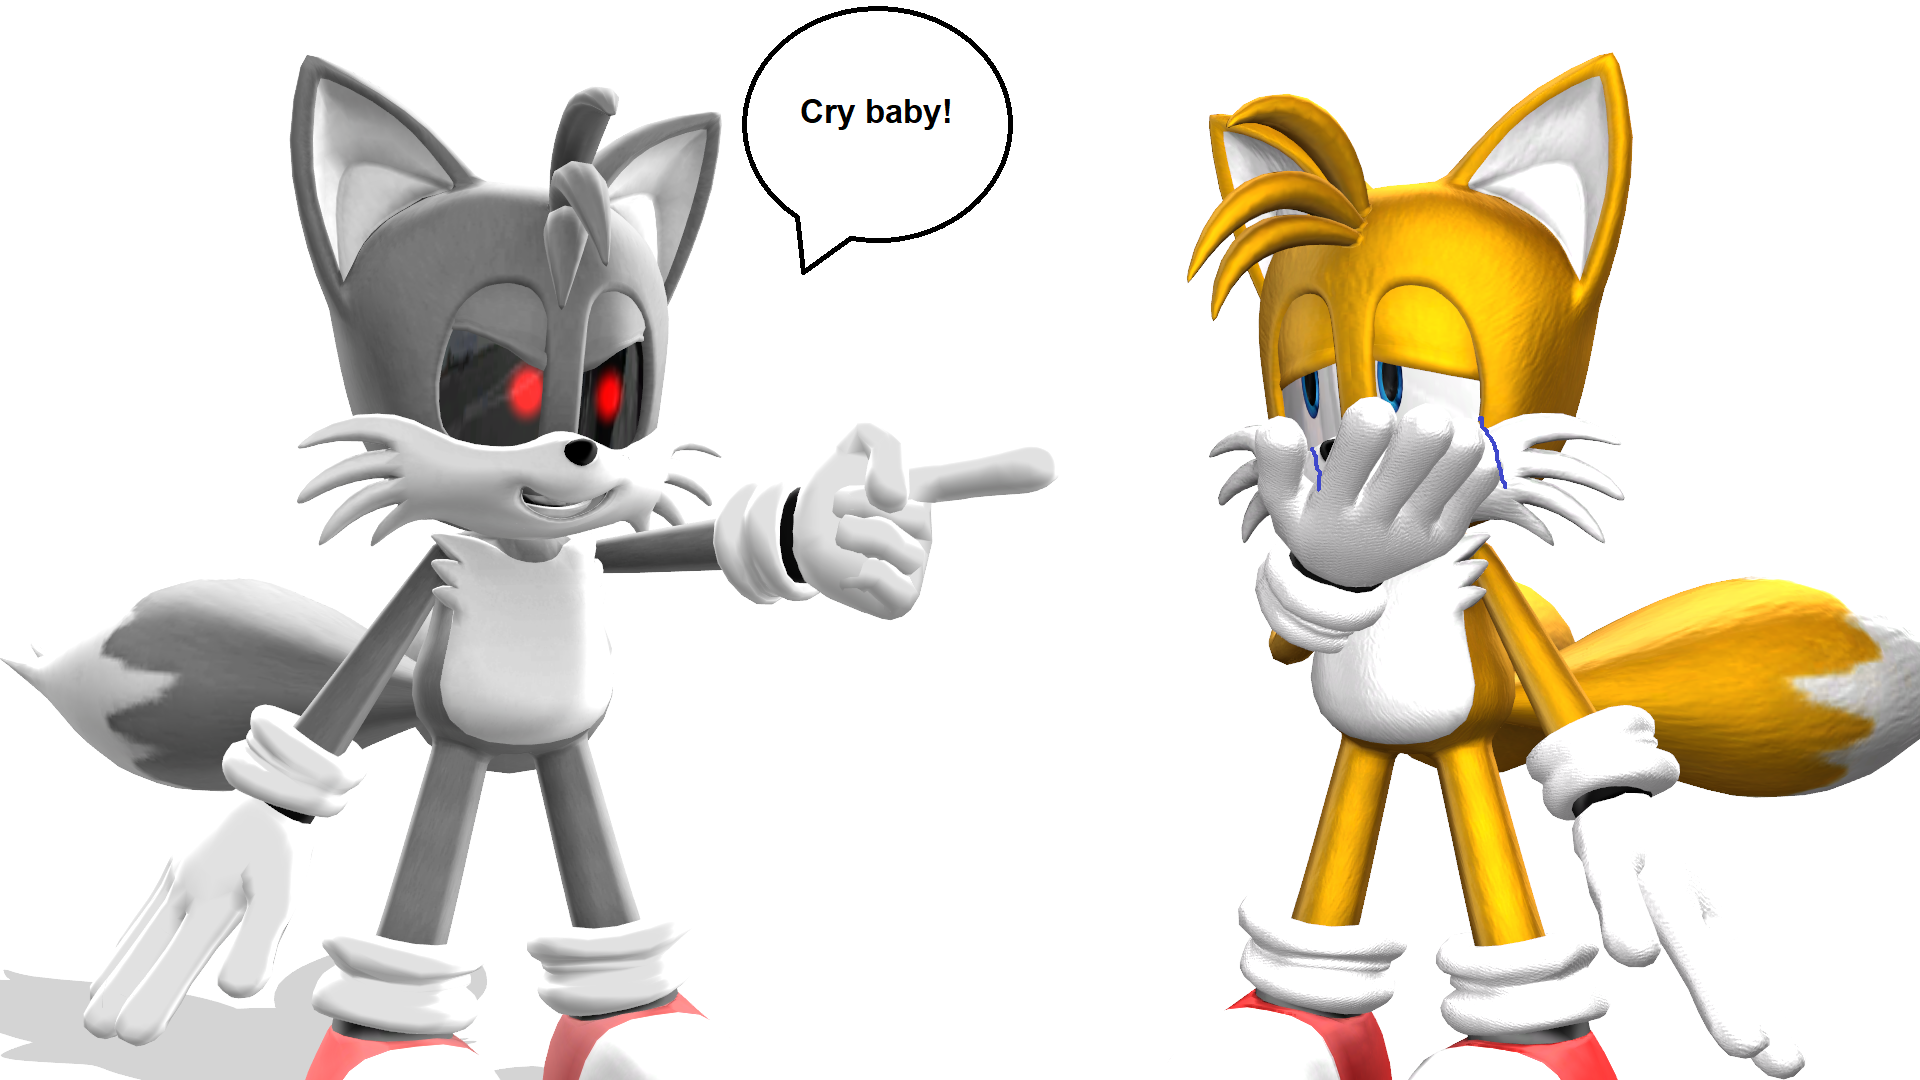 Minecraft SONIC & TAILS .EXE - TAILS.EXE HAS CAPTURED LITTLE KELLY